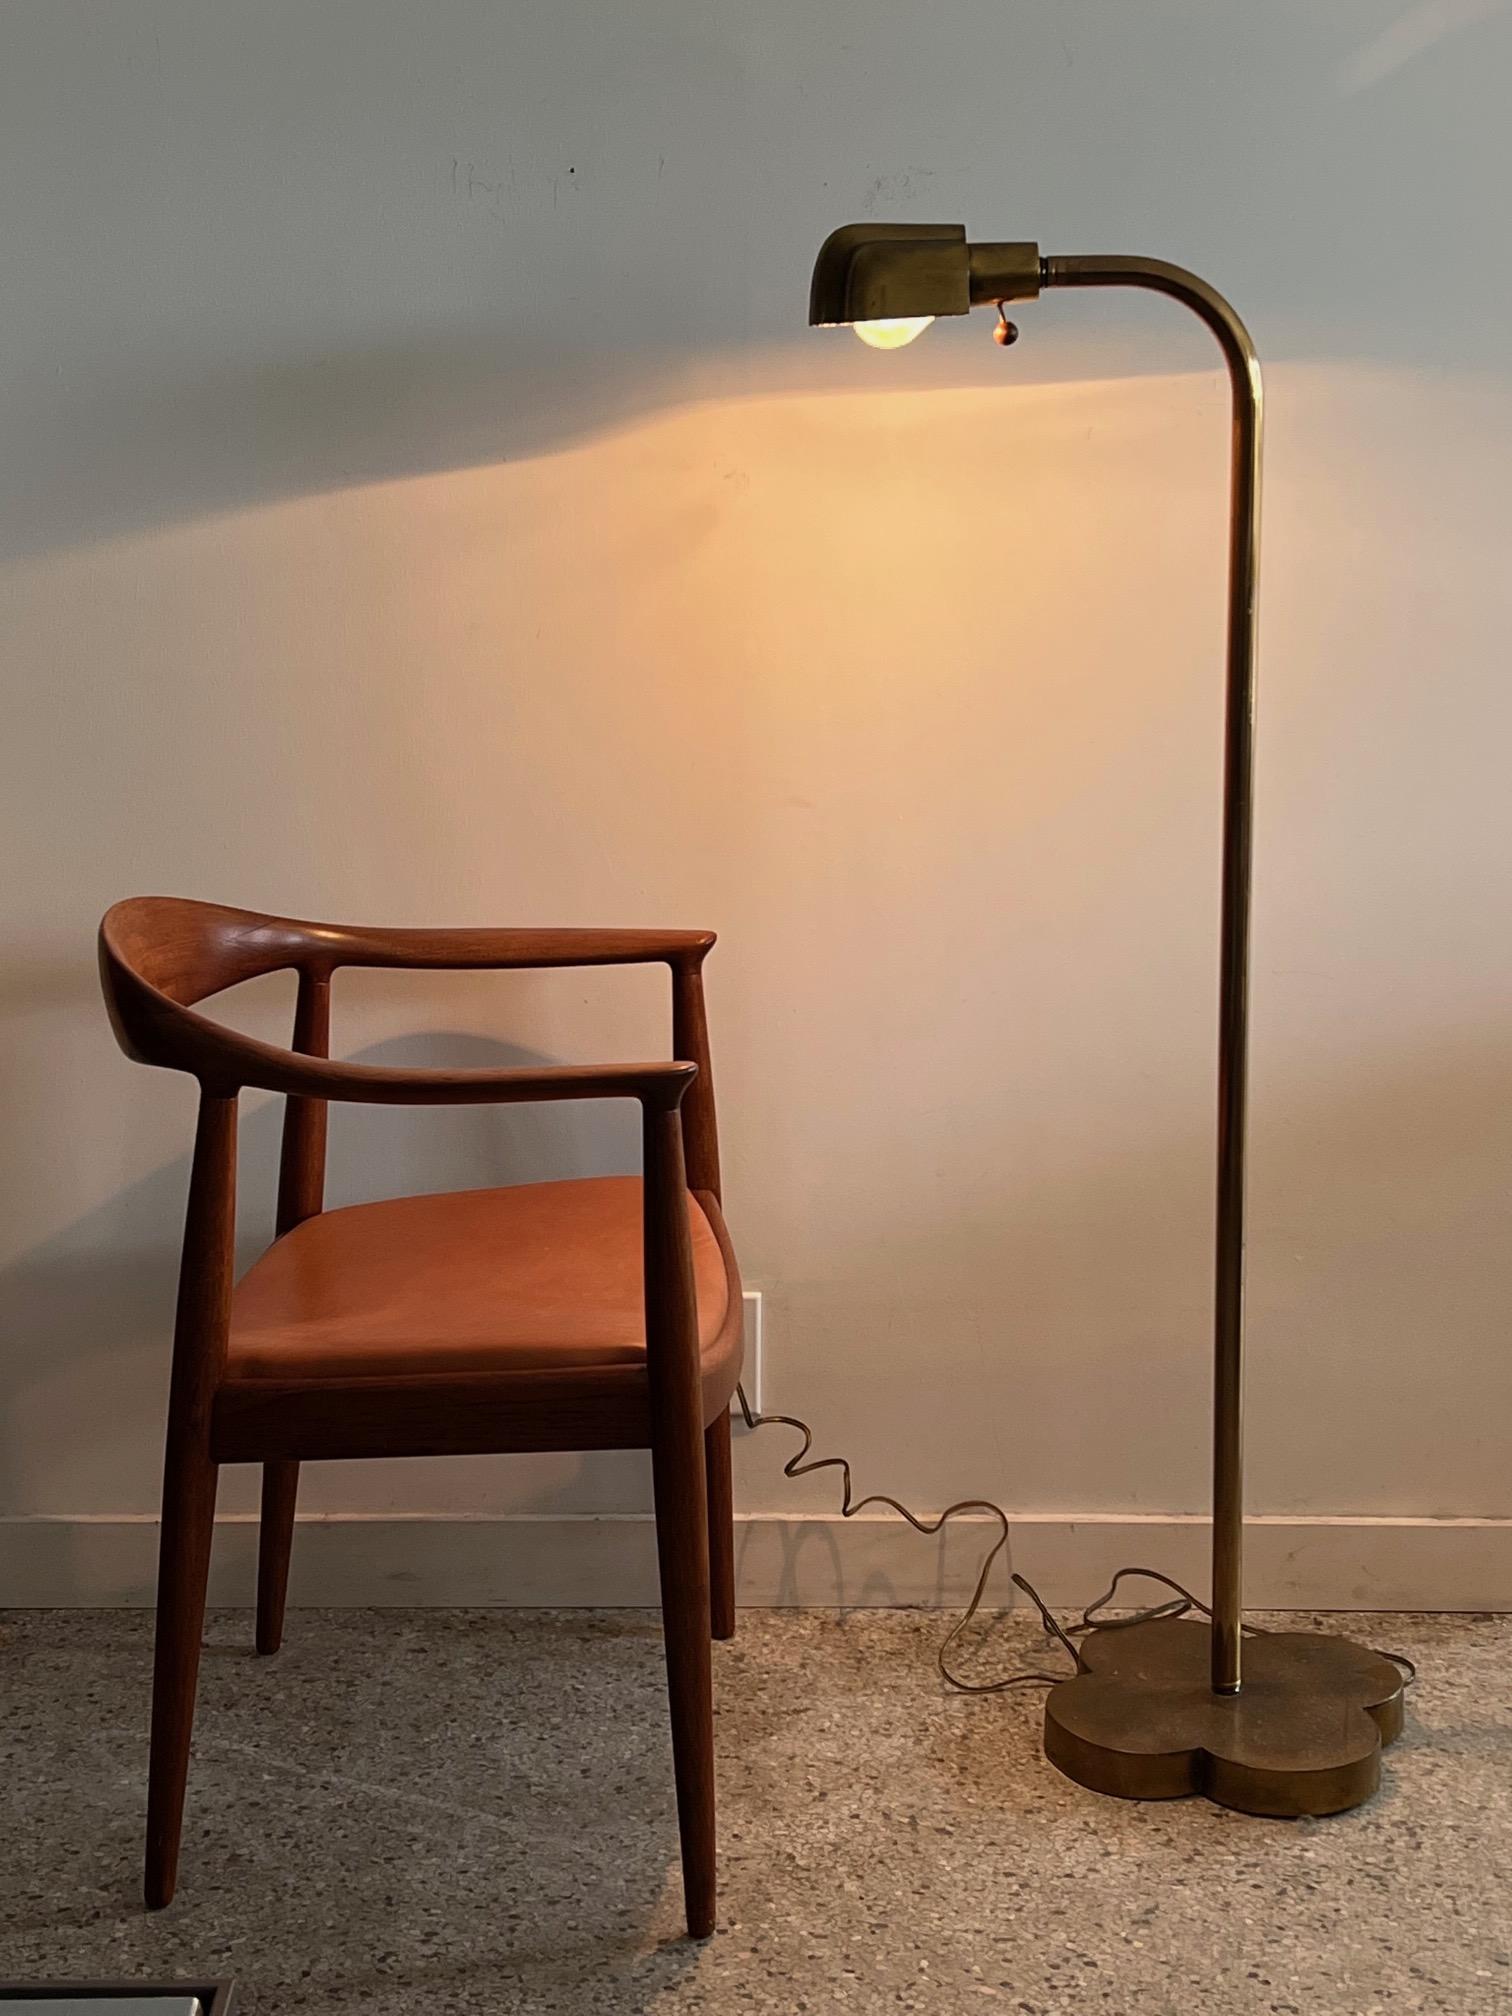 Unusual patinated brass reading/floor lamp with a heavy clover shaped base. The lamp has a nice aged patina. Two way wood ball switch.